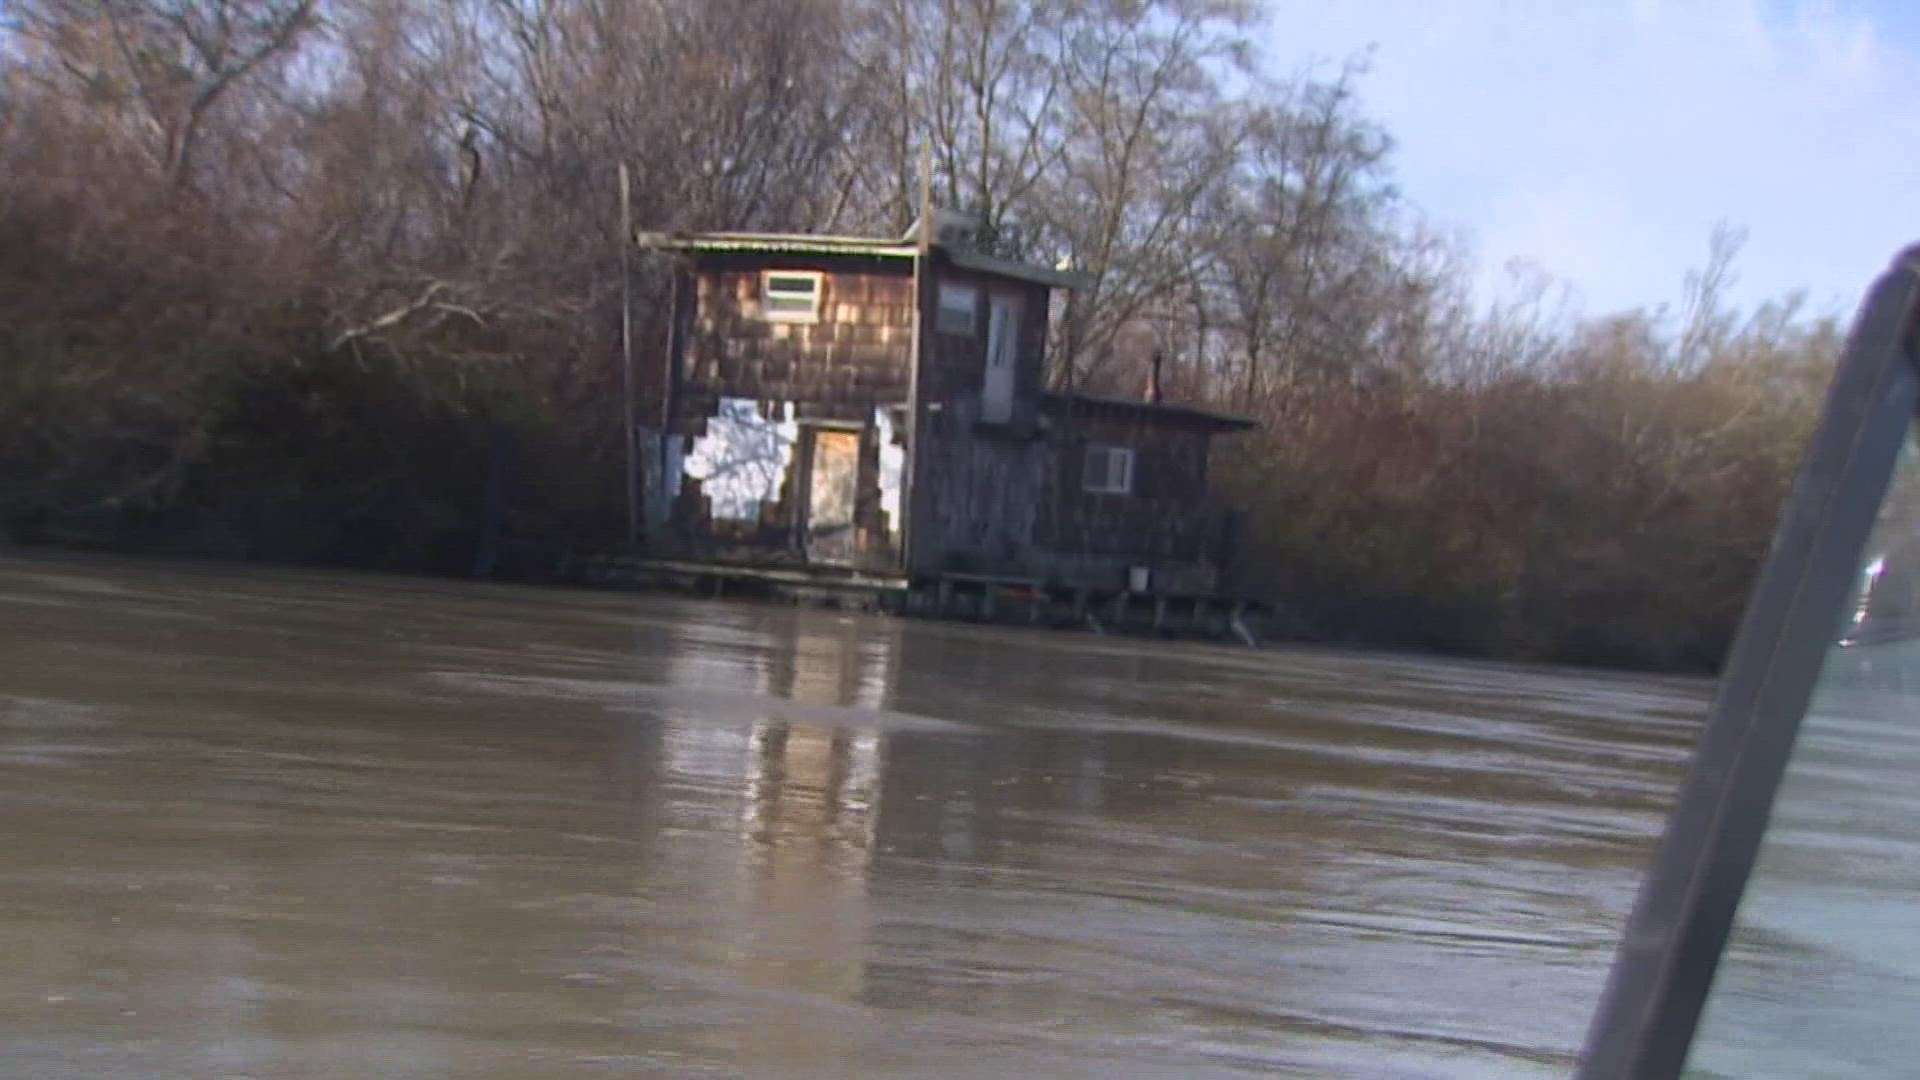 Despite "very adverse conditions," Johnn Anderson's house boat held together when it was swept 5 miles down stream.